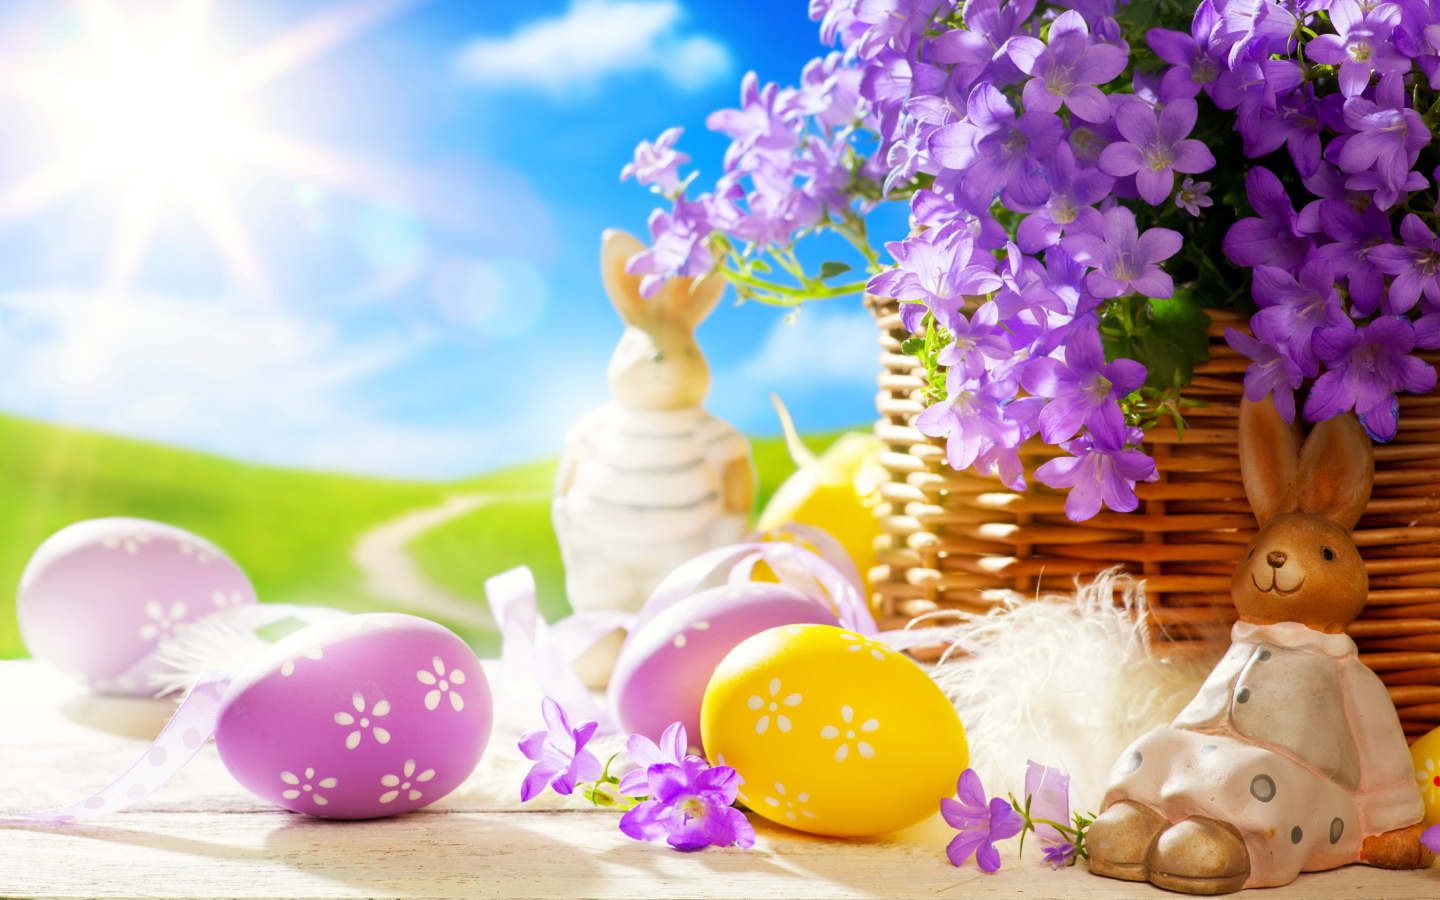 Easter Rabbit And Purple Flowers wallpaper 1440x900